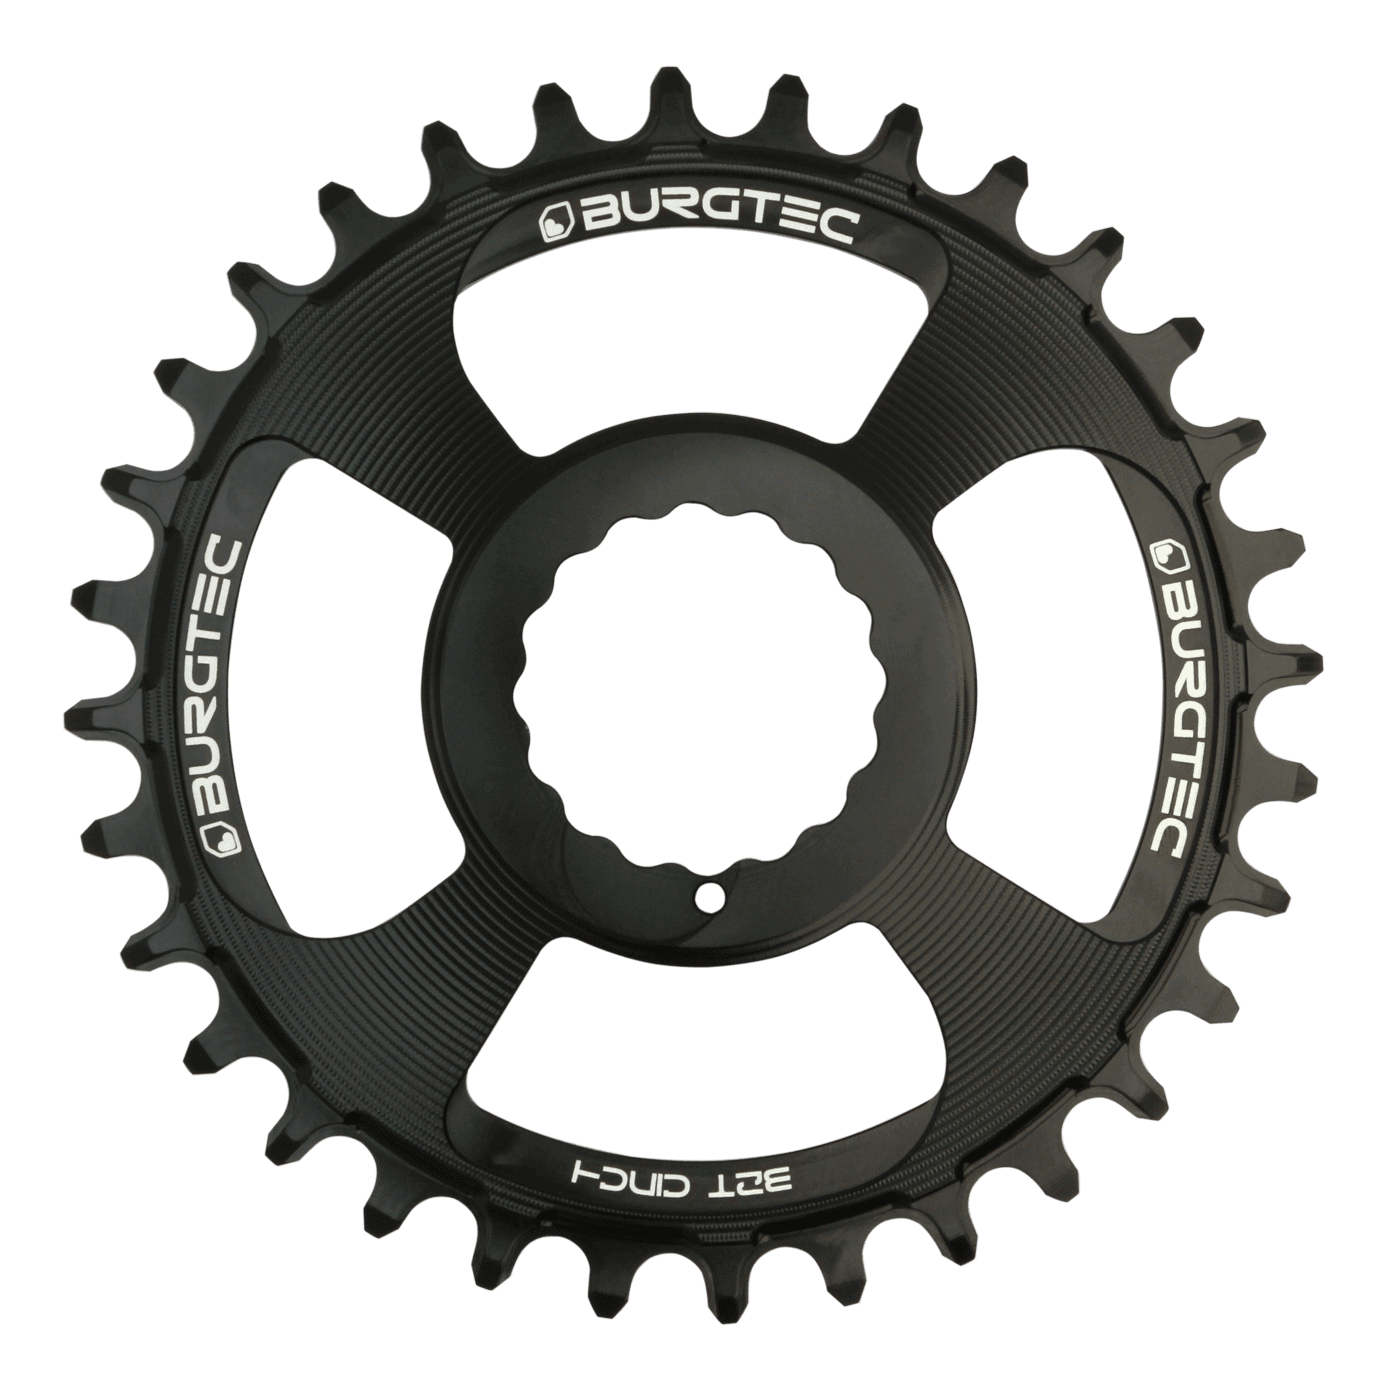 Burgtec Chainring Thick Thin - Cinch direct mount